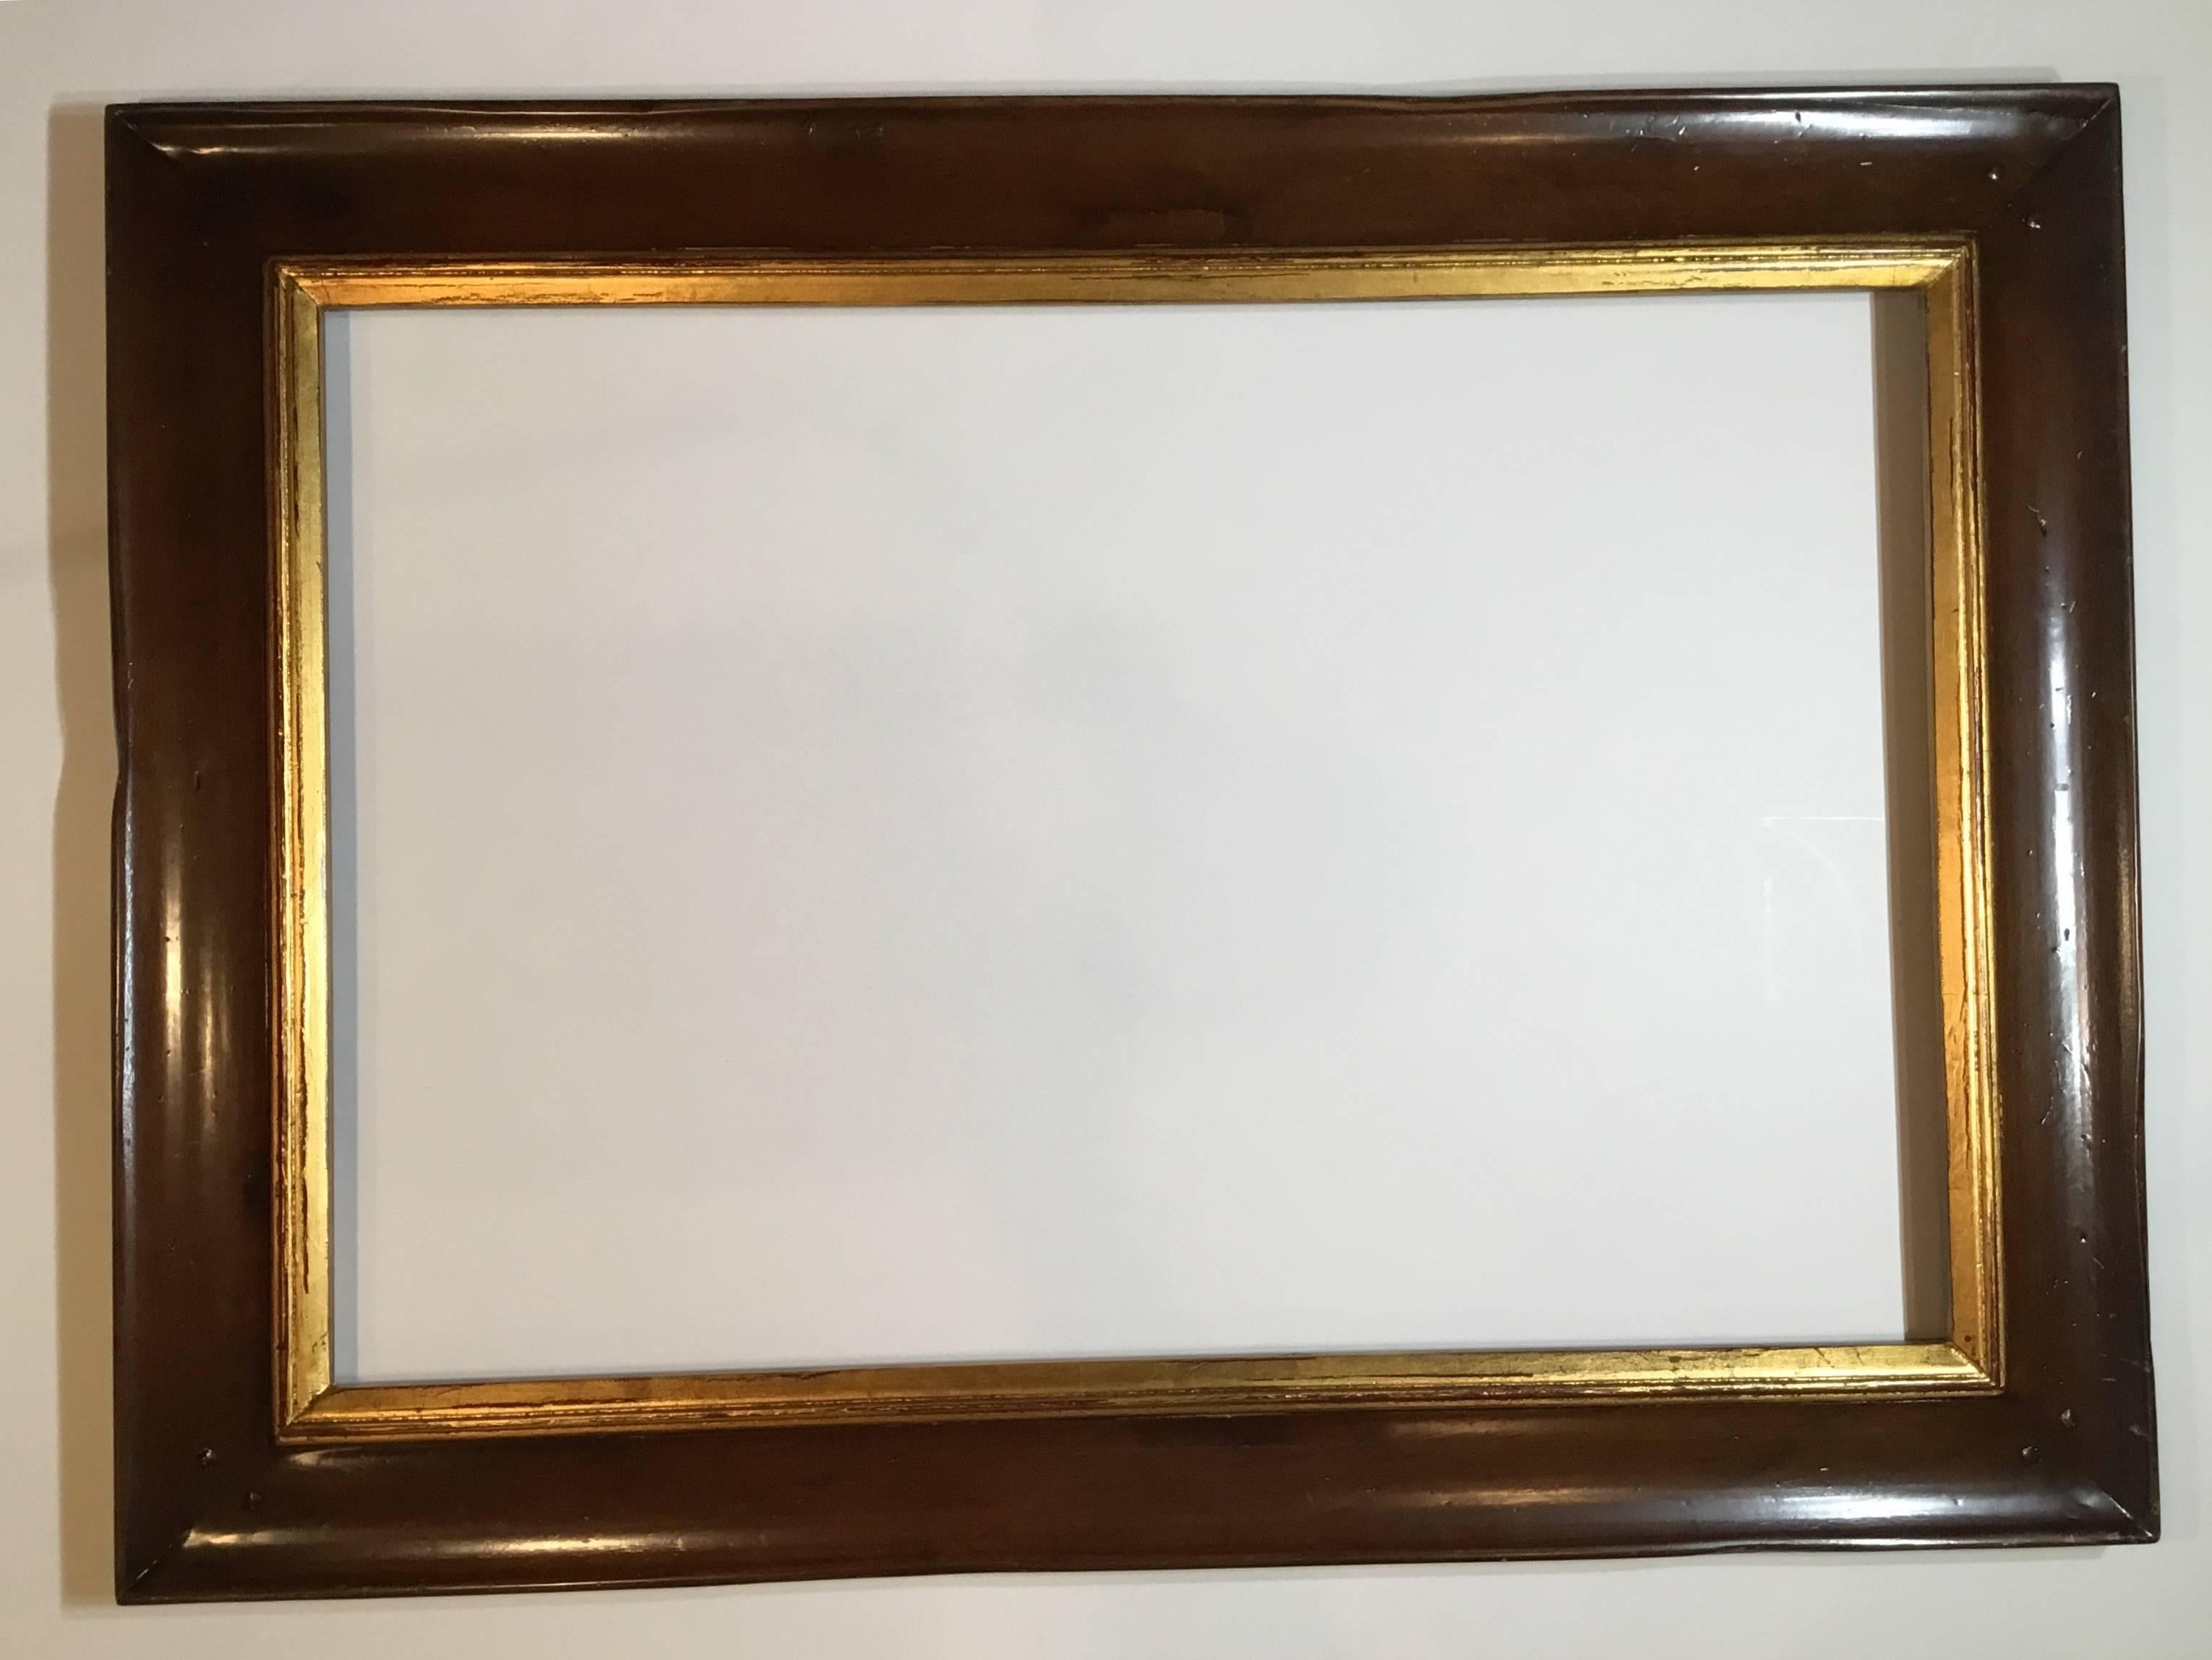 Beautiful wood frame with gold leaf trimming, would make great frame for important painting, or just convert it to a impressive wood mirror.
Glass mirror is not included.
Actual inside size for painting or mirror placement is: 24